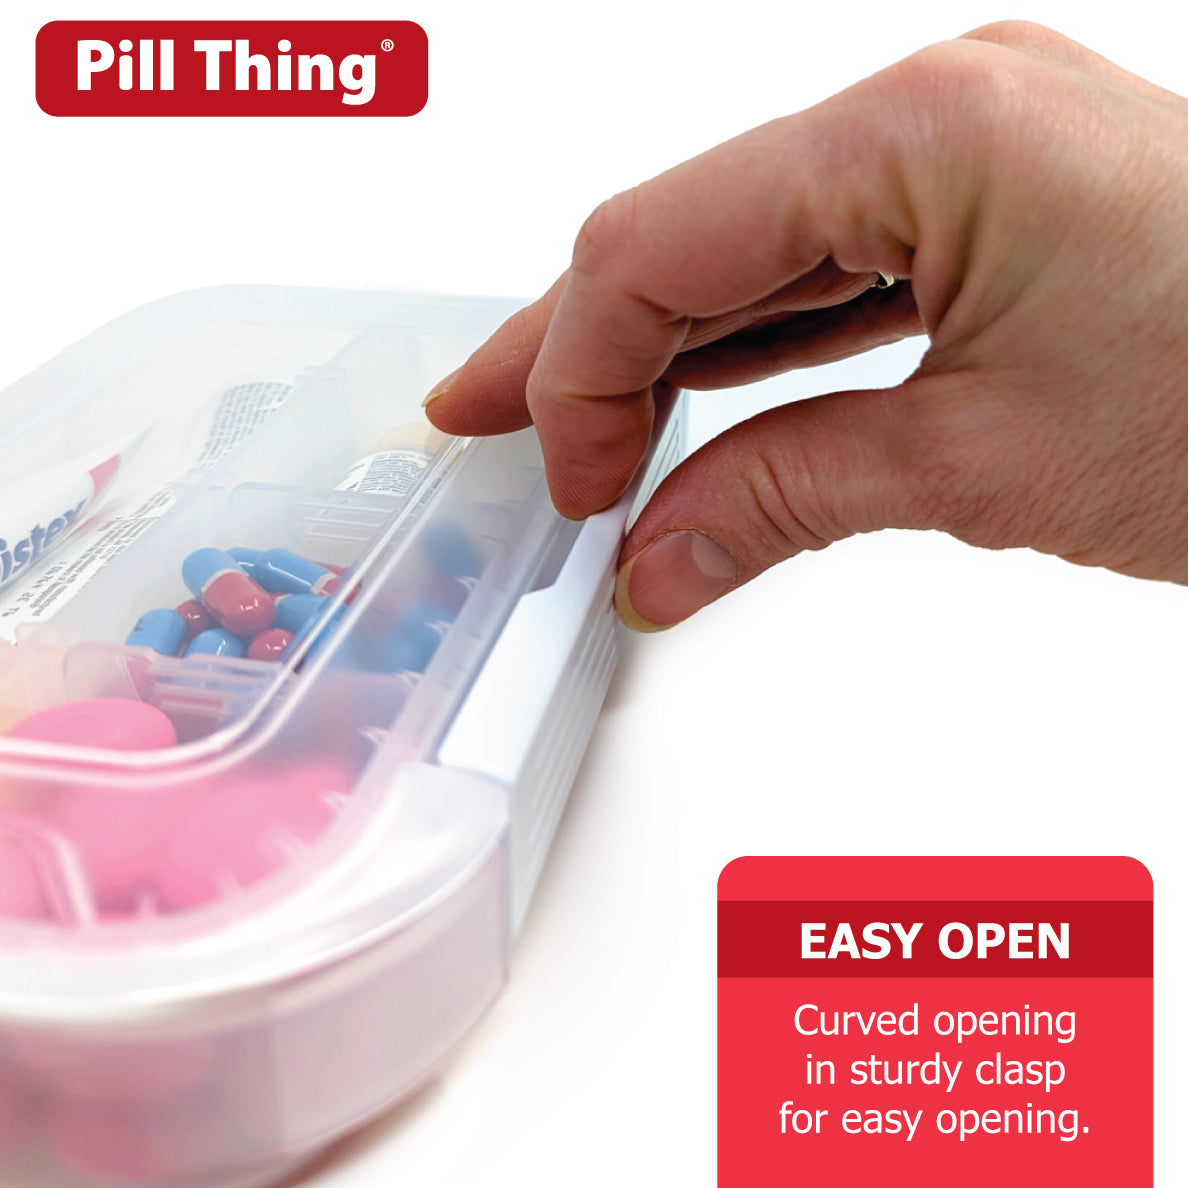 12 Compartment Large Pill Case with Airtight, Waterproof Seal